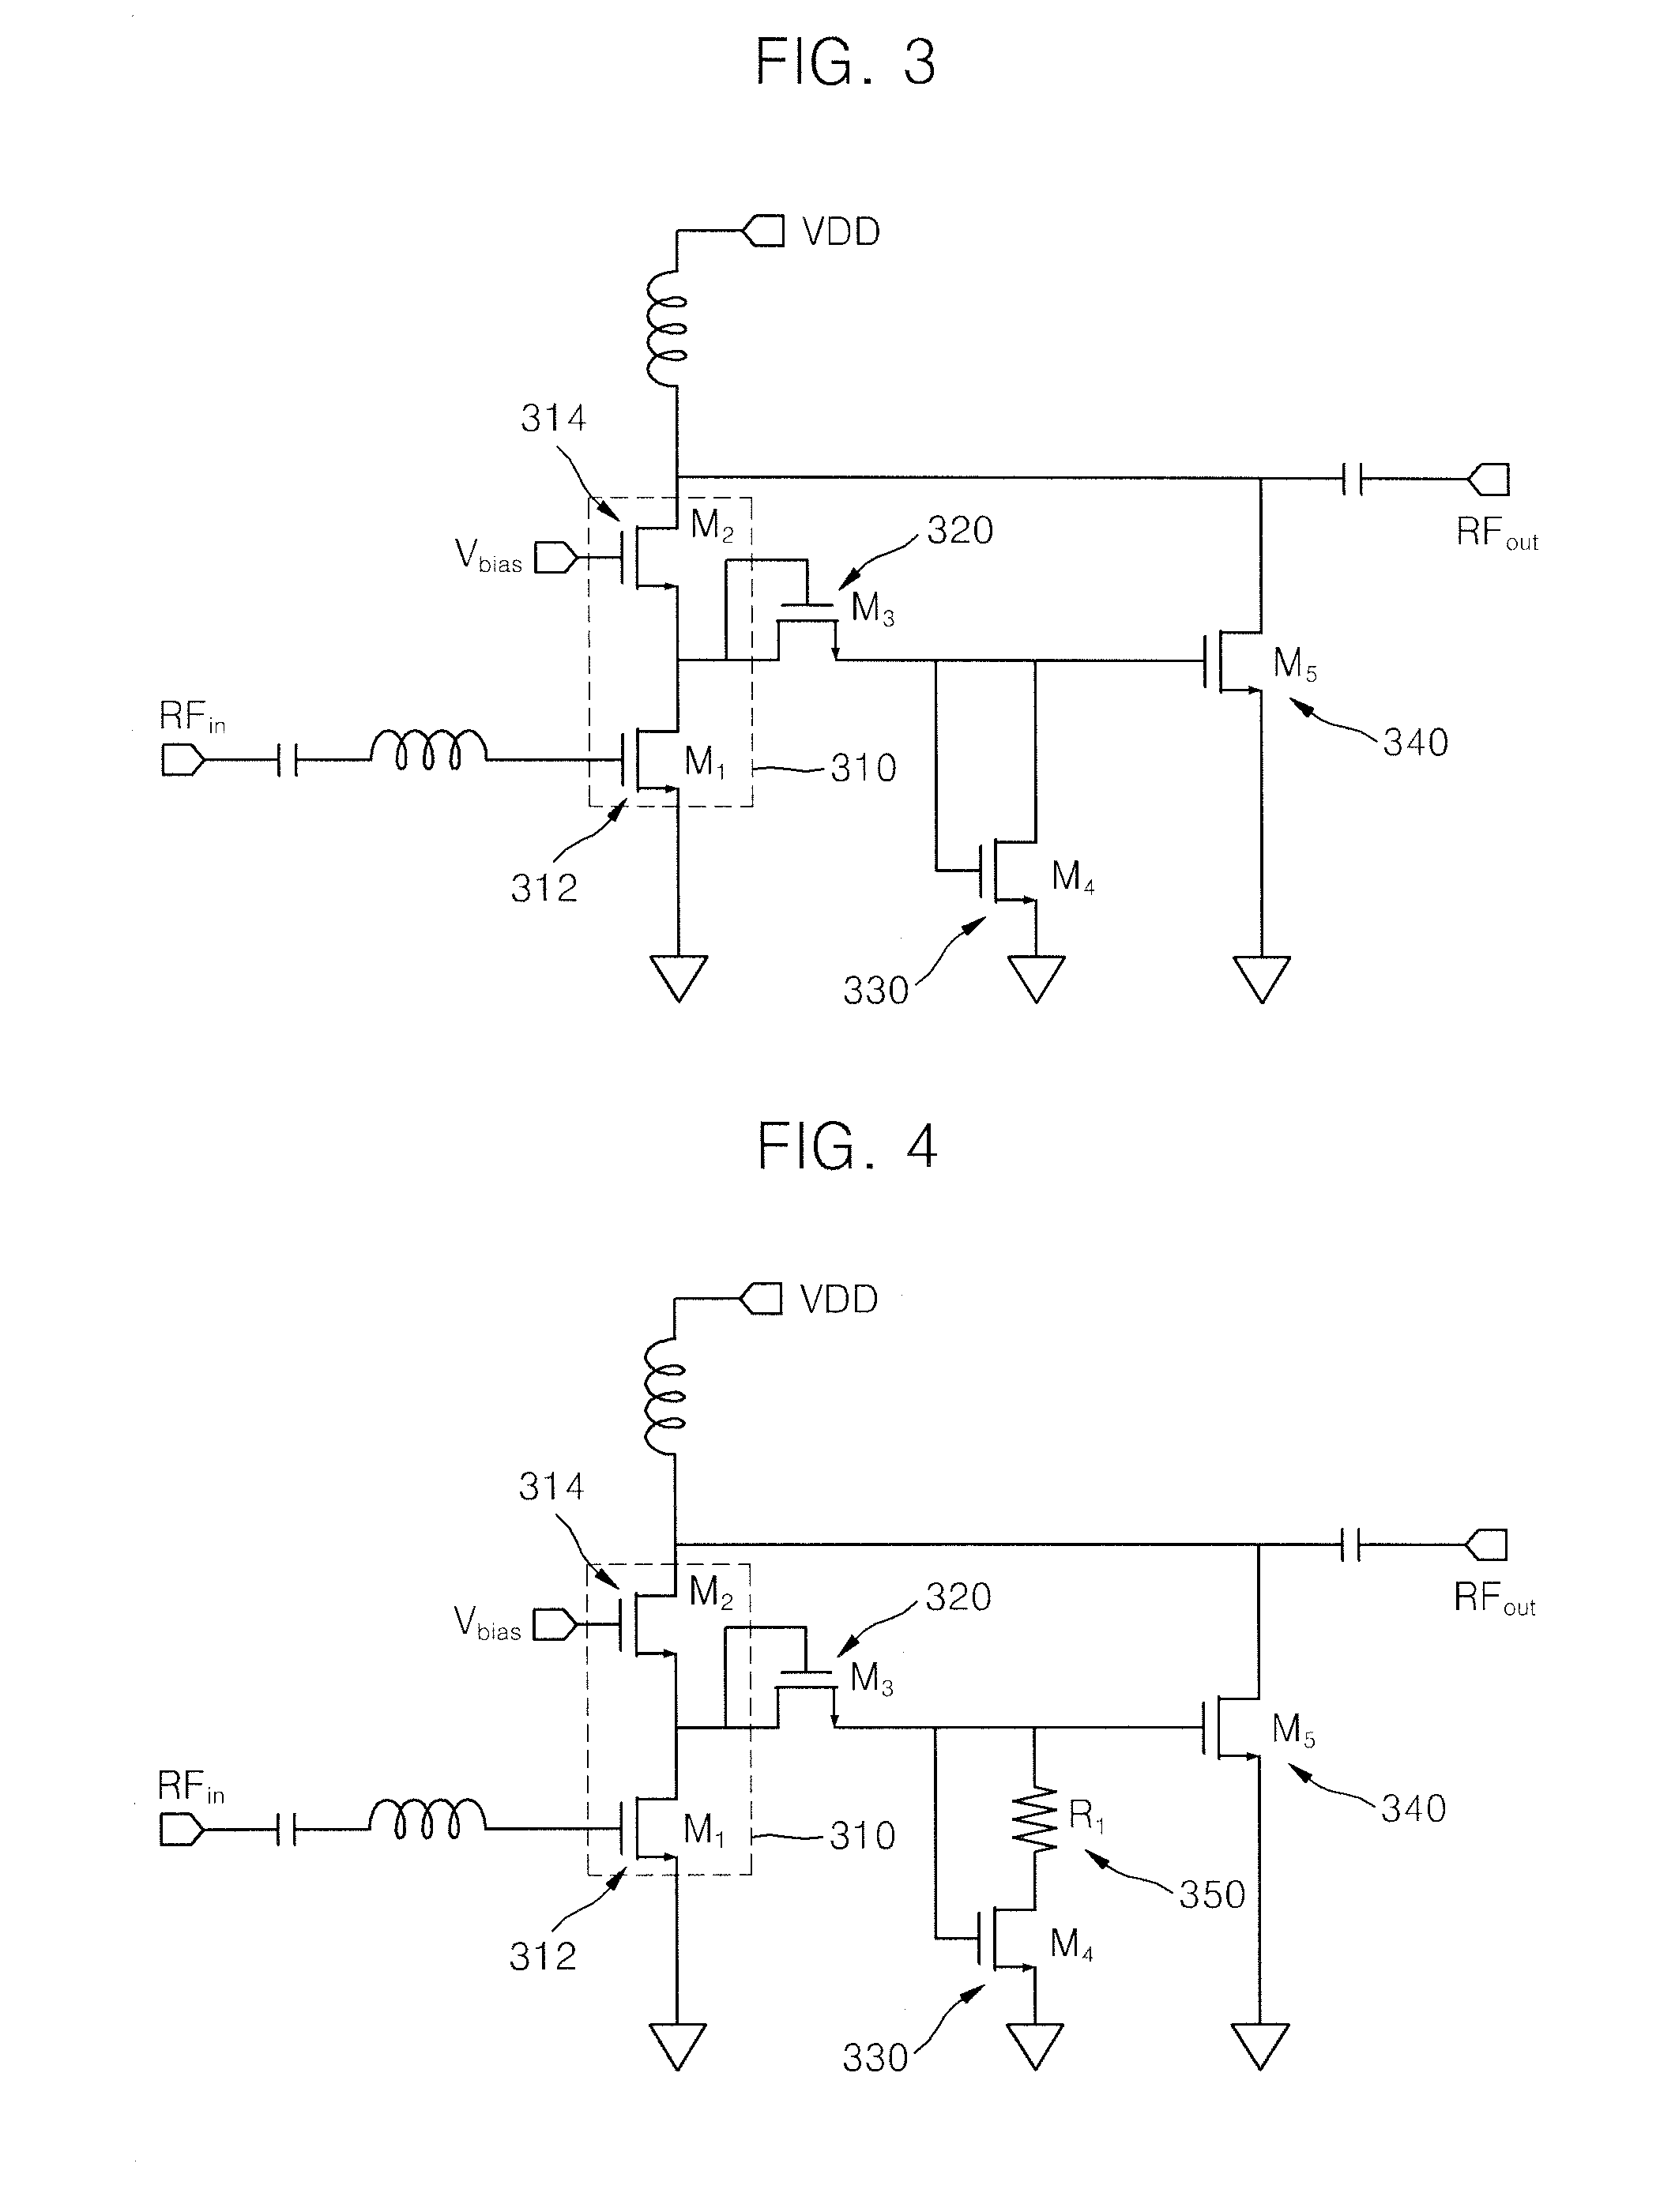 Signal amplification apparatus with advanced linearization